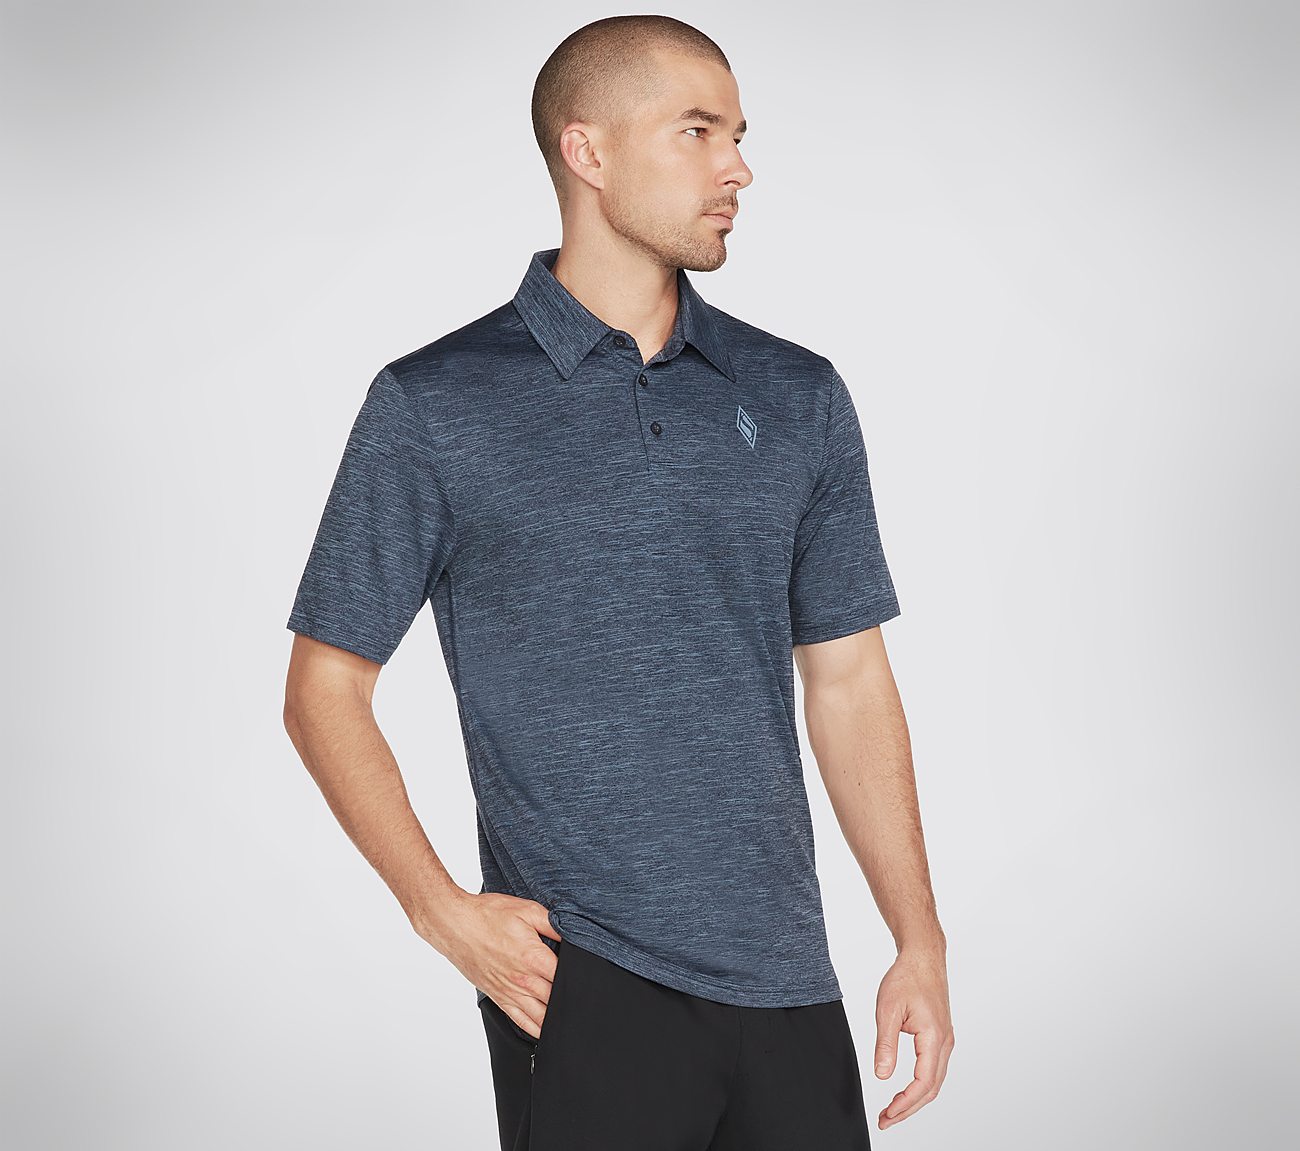 ON THE ROAD POLO, BLUE/GREY Apparels Bottom View